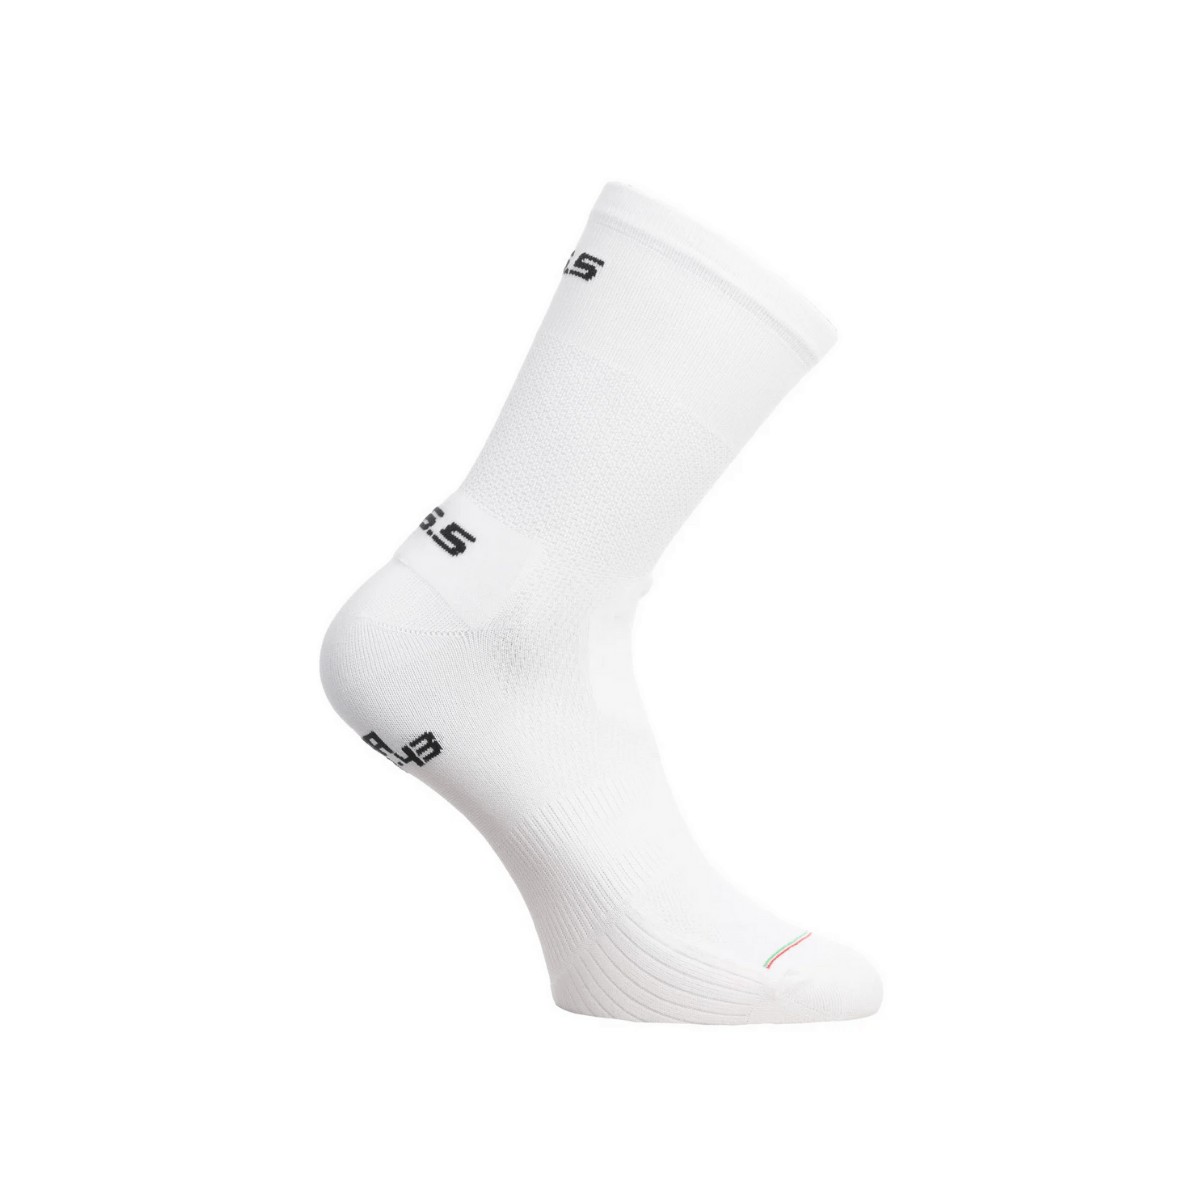 chaussettes q36.5 ultra blanches, taille 40-43